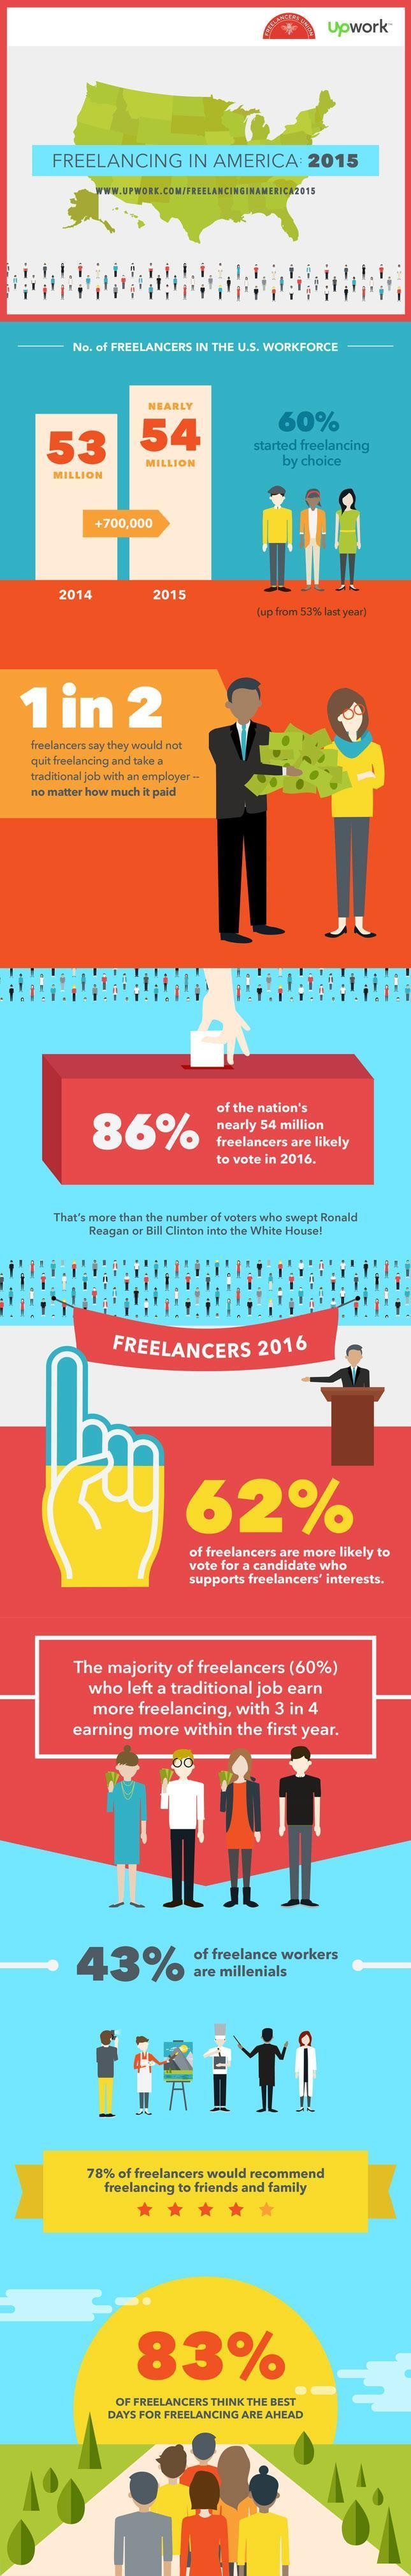 freelancing-in-america-infographic-blog